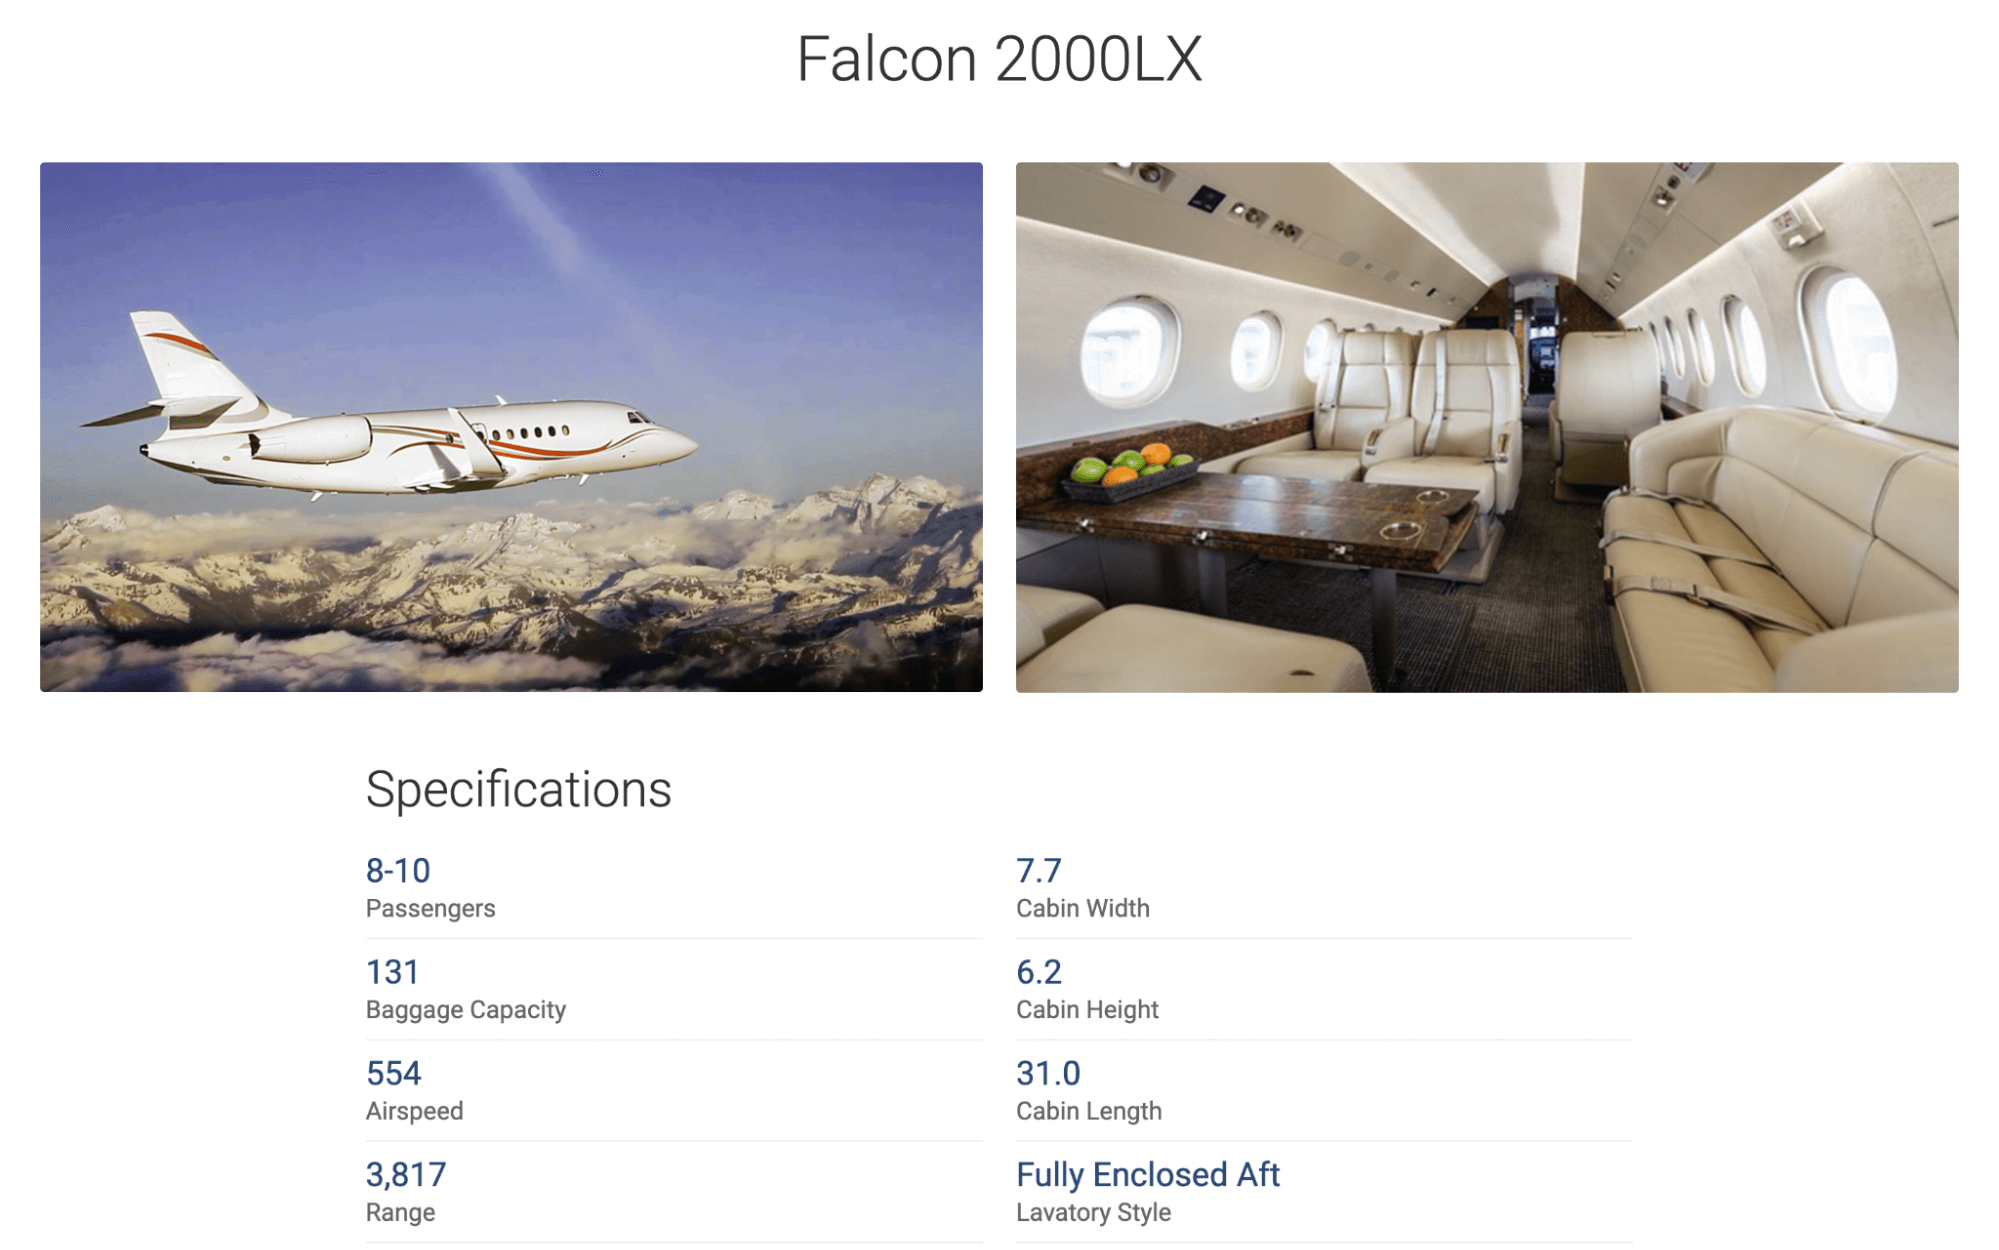 Dassault Falcon 20000LX jet offered by JetOptions for rent.